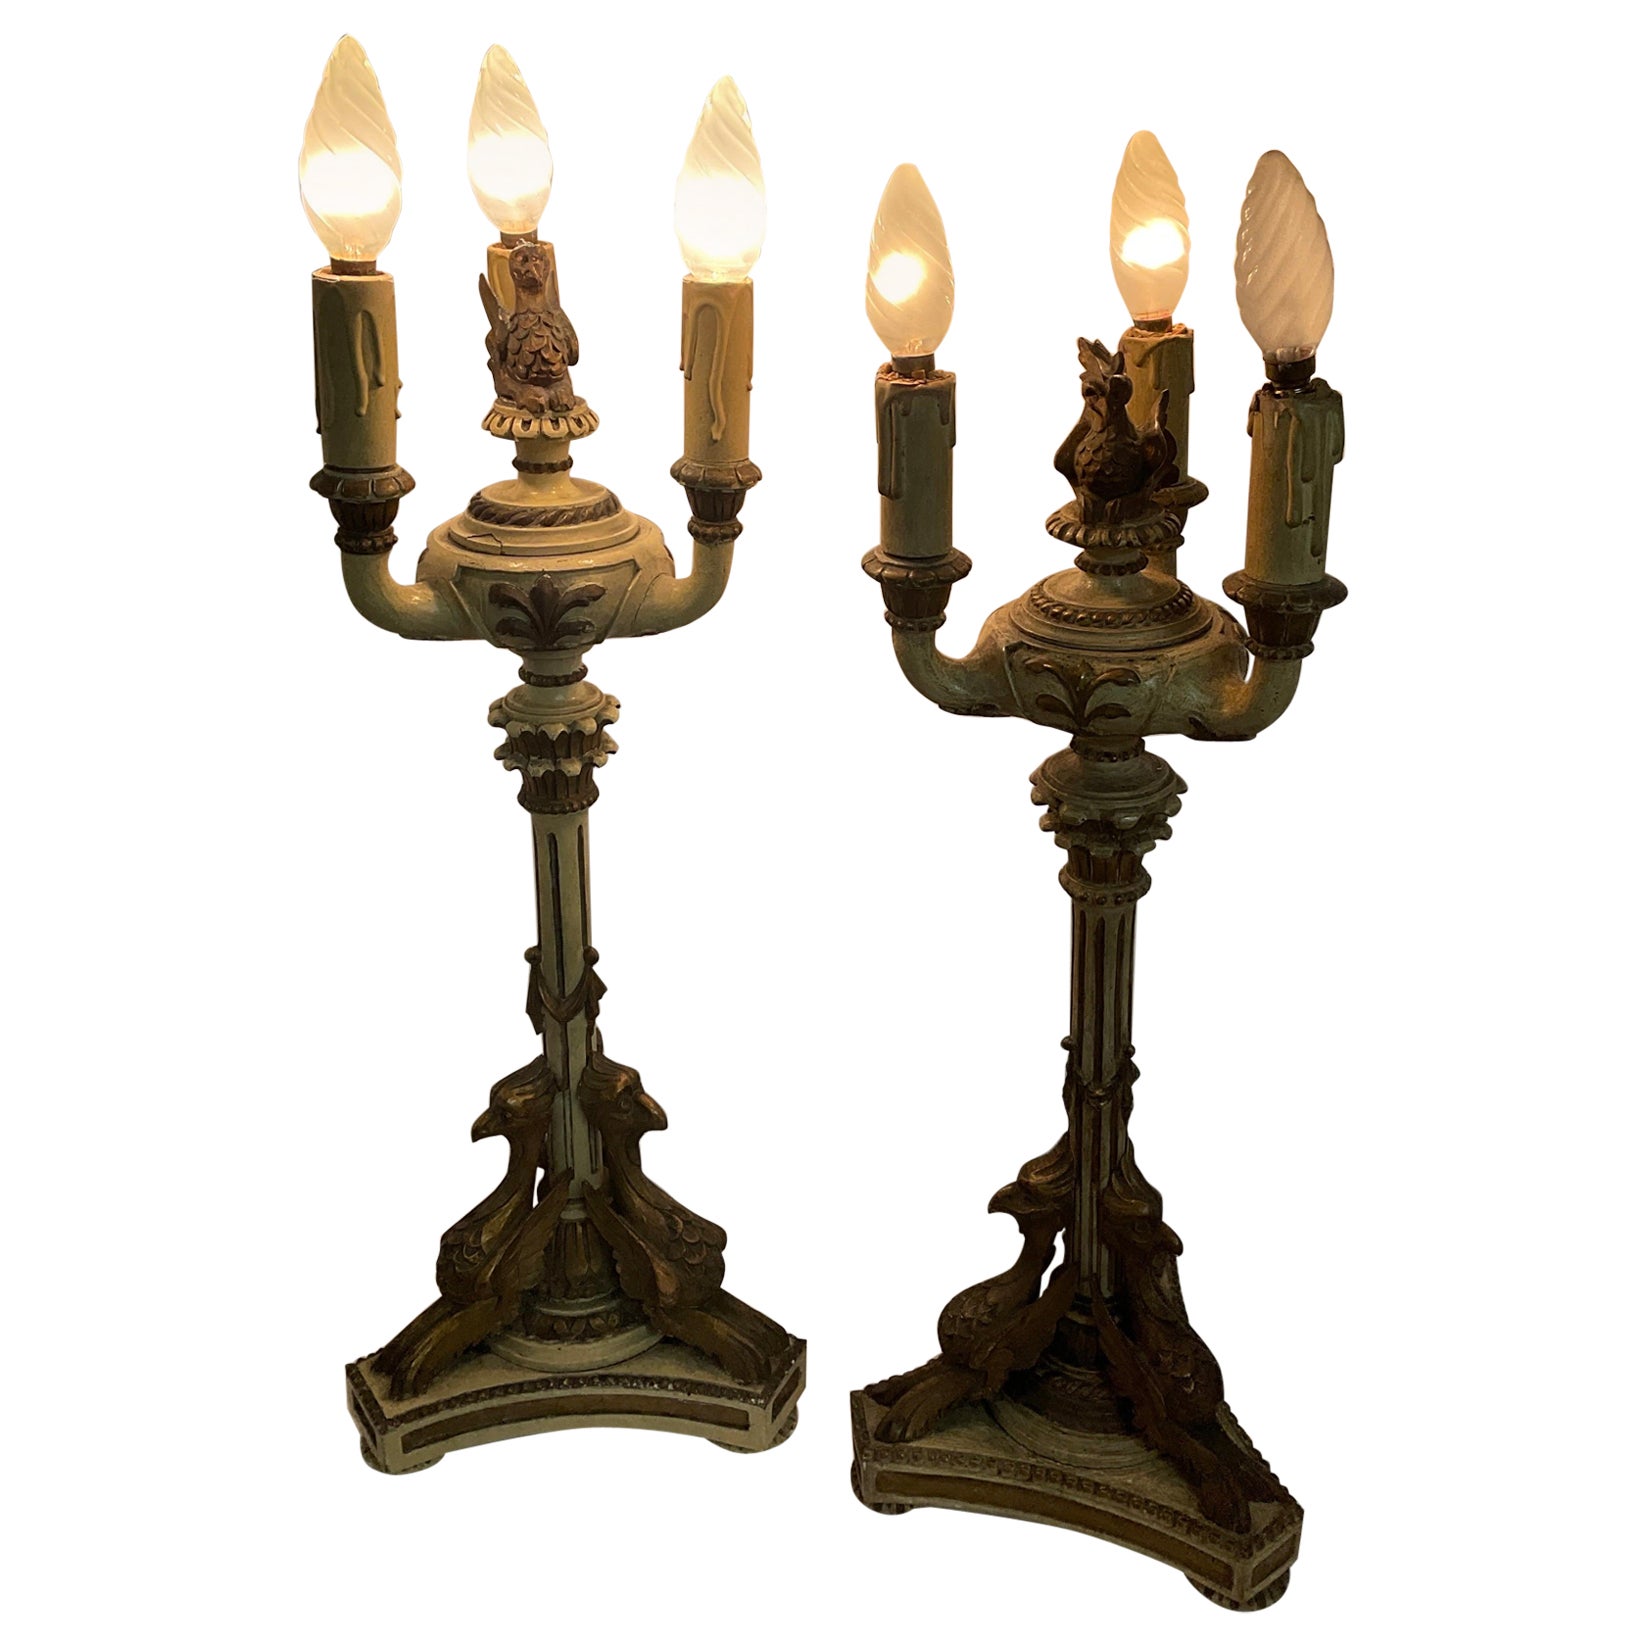 Empire-style lacquered and gilded wood candlesticks from the late 1800s